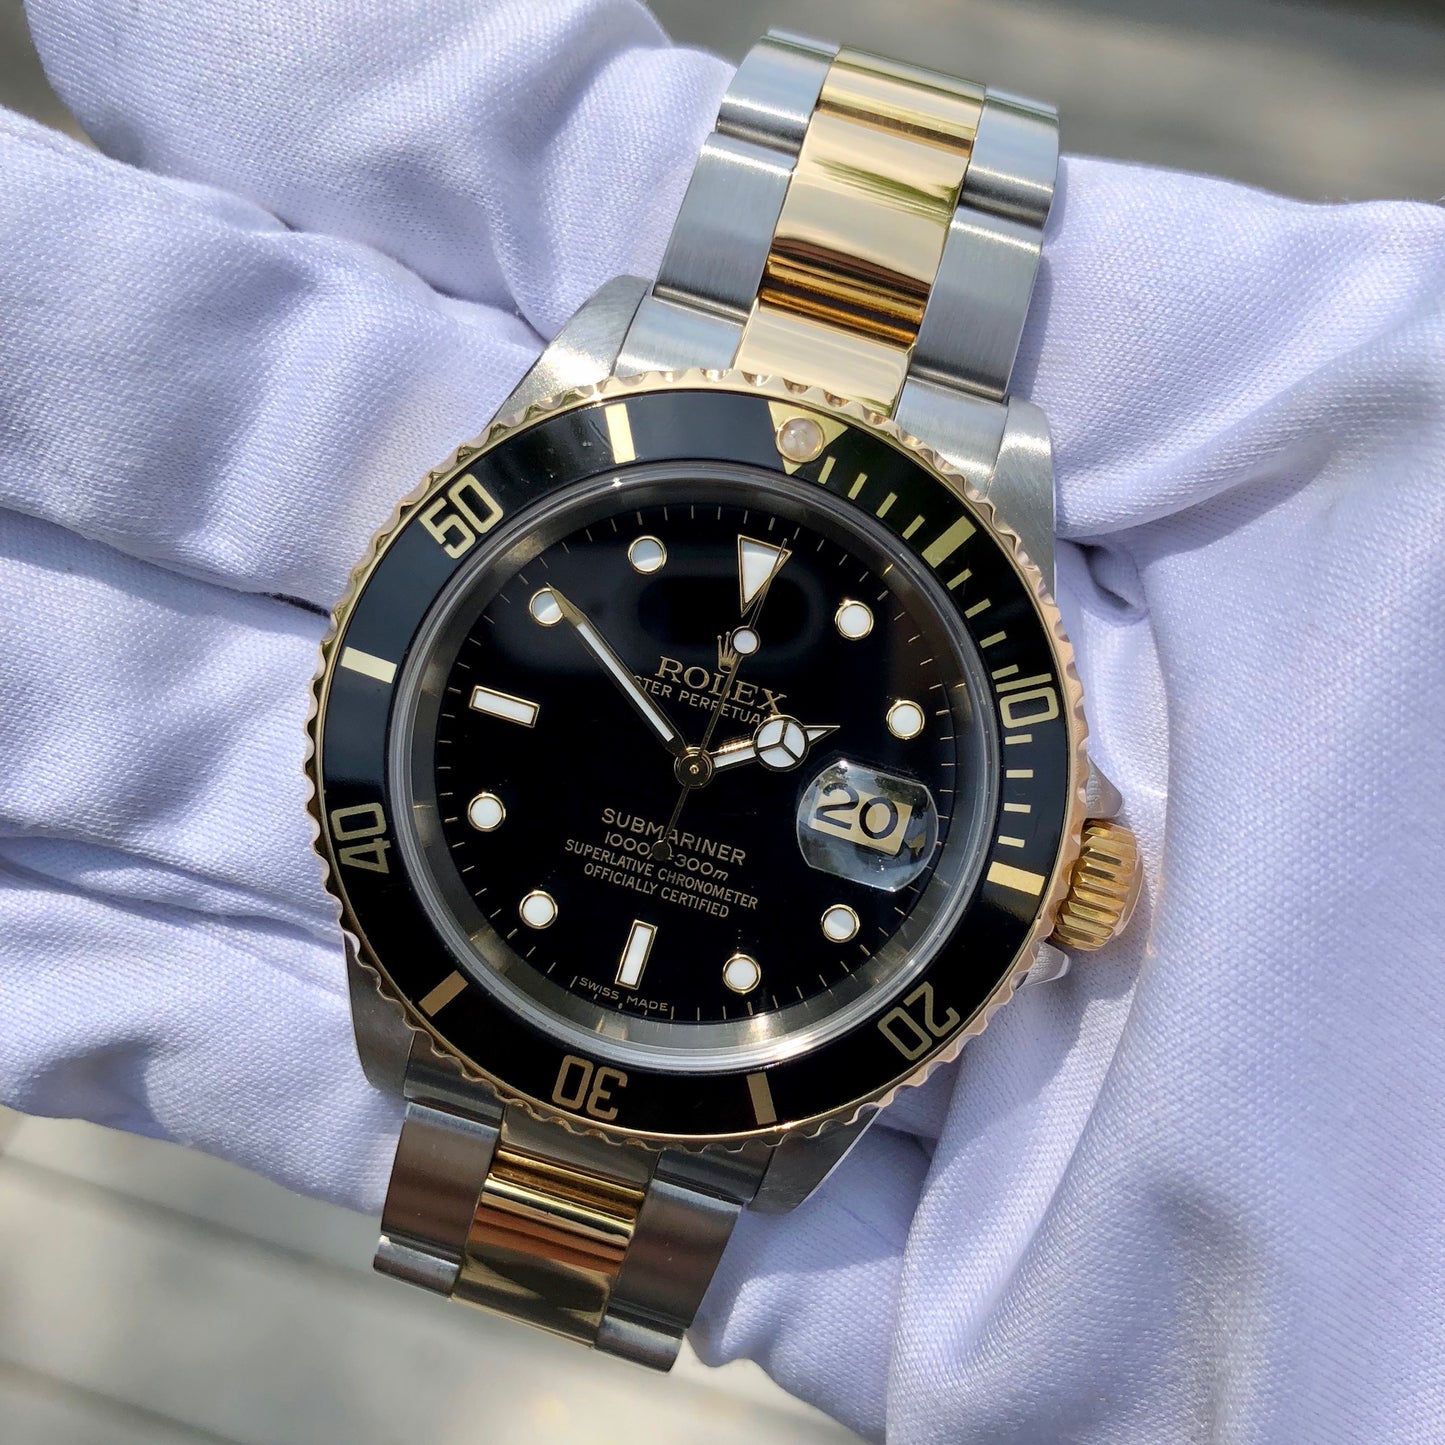 Rolex Submariner 16613 Two Tone Black Steel 18K Gold Wristwatch Box Papers Circa 2005 - Hashtag Watch Company